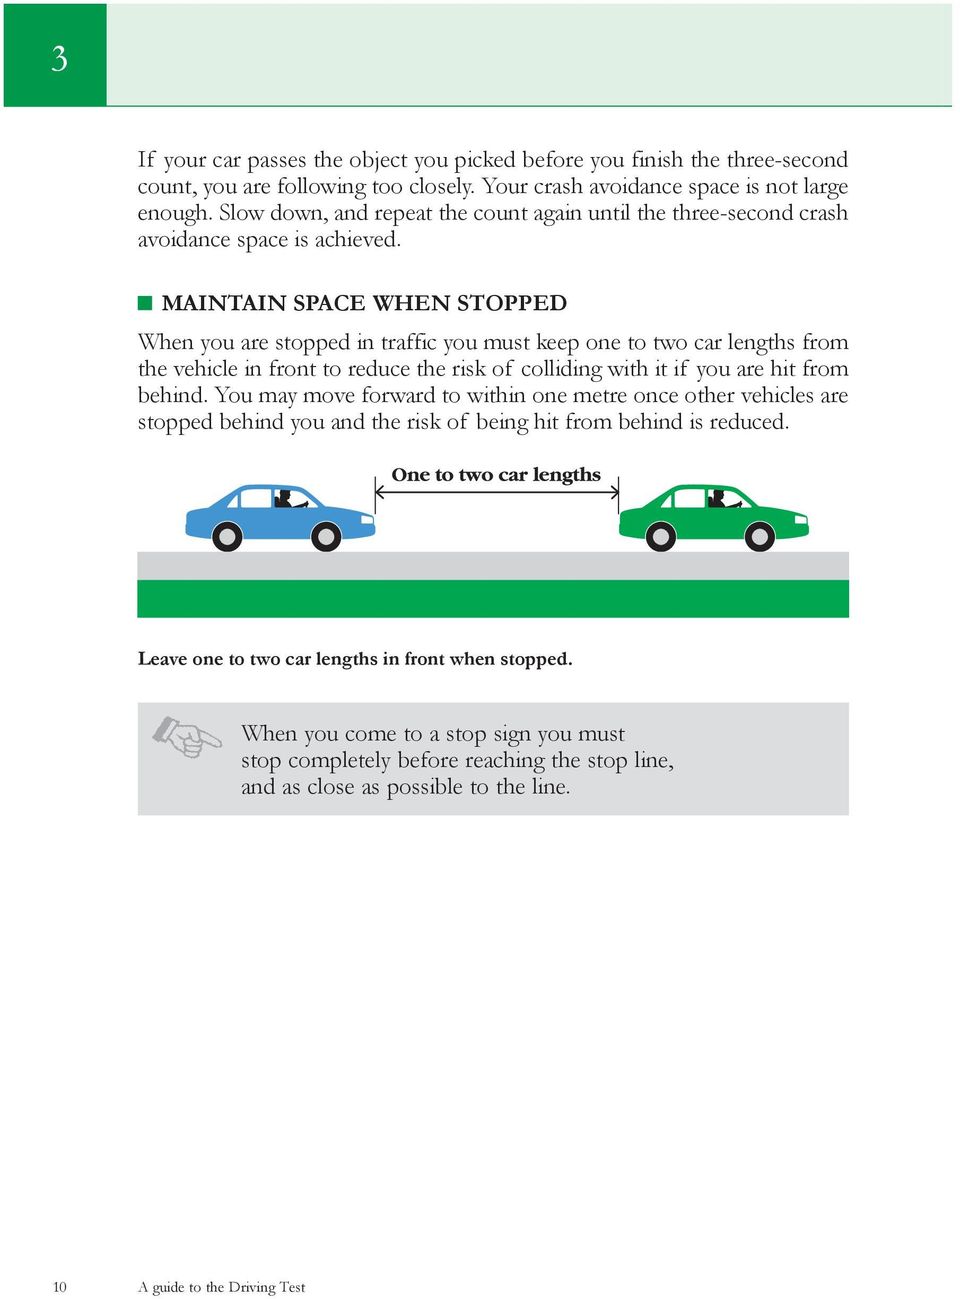 MAINTAIN SPACE WHEN STOPPED When you are stopped in traffic you must keep one to two car lengths from the vehicle in front to reduce the risk of colliding with it if you are hit from behind.